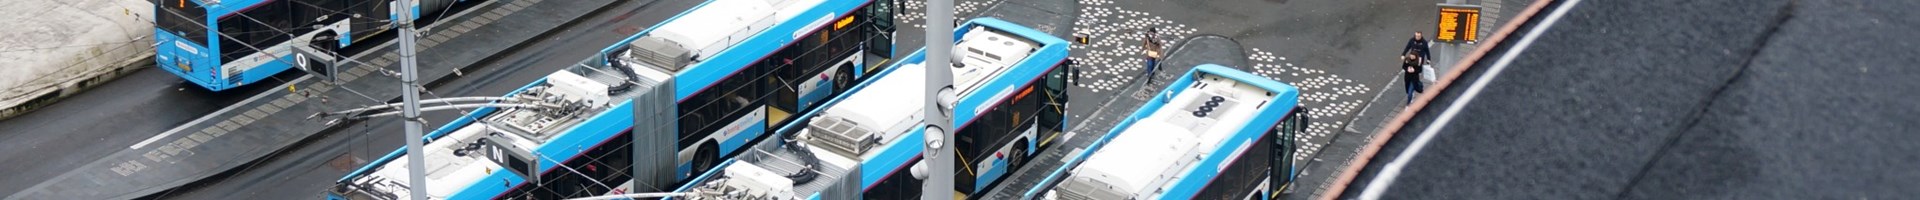 Public Transport Electric Buses At Anrhem Central Station Waiting To Pick Up Travelers T20 Lxk3x7